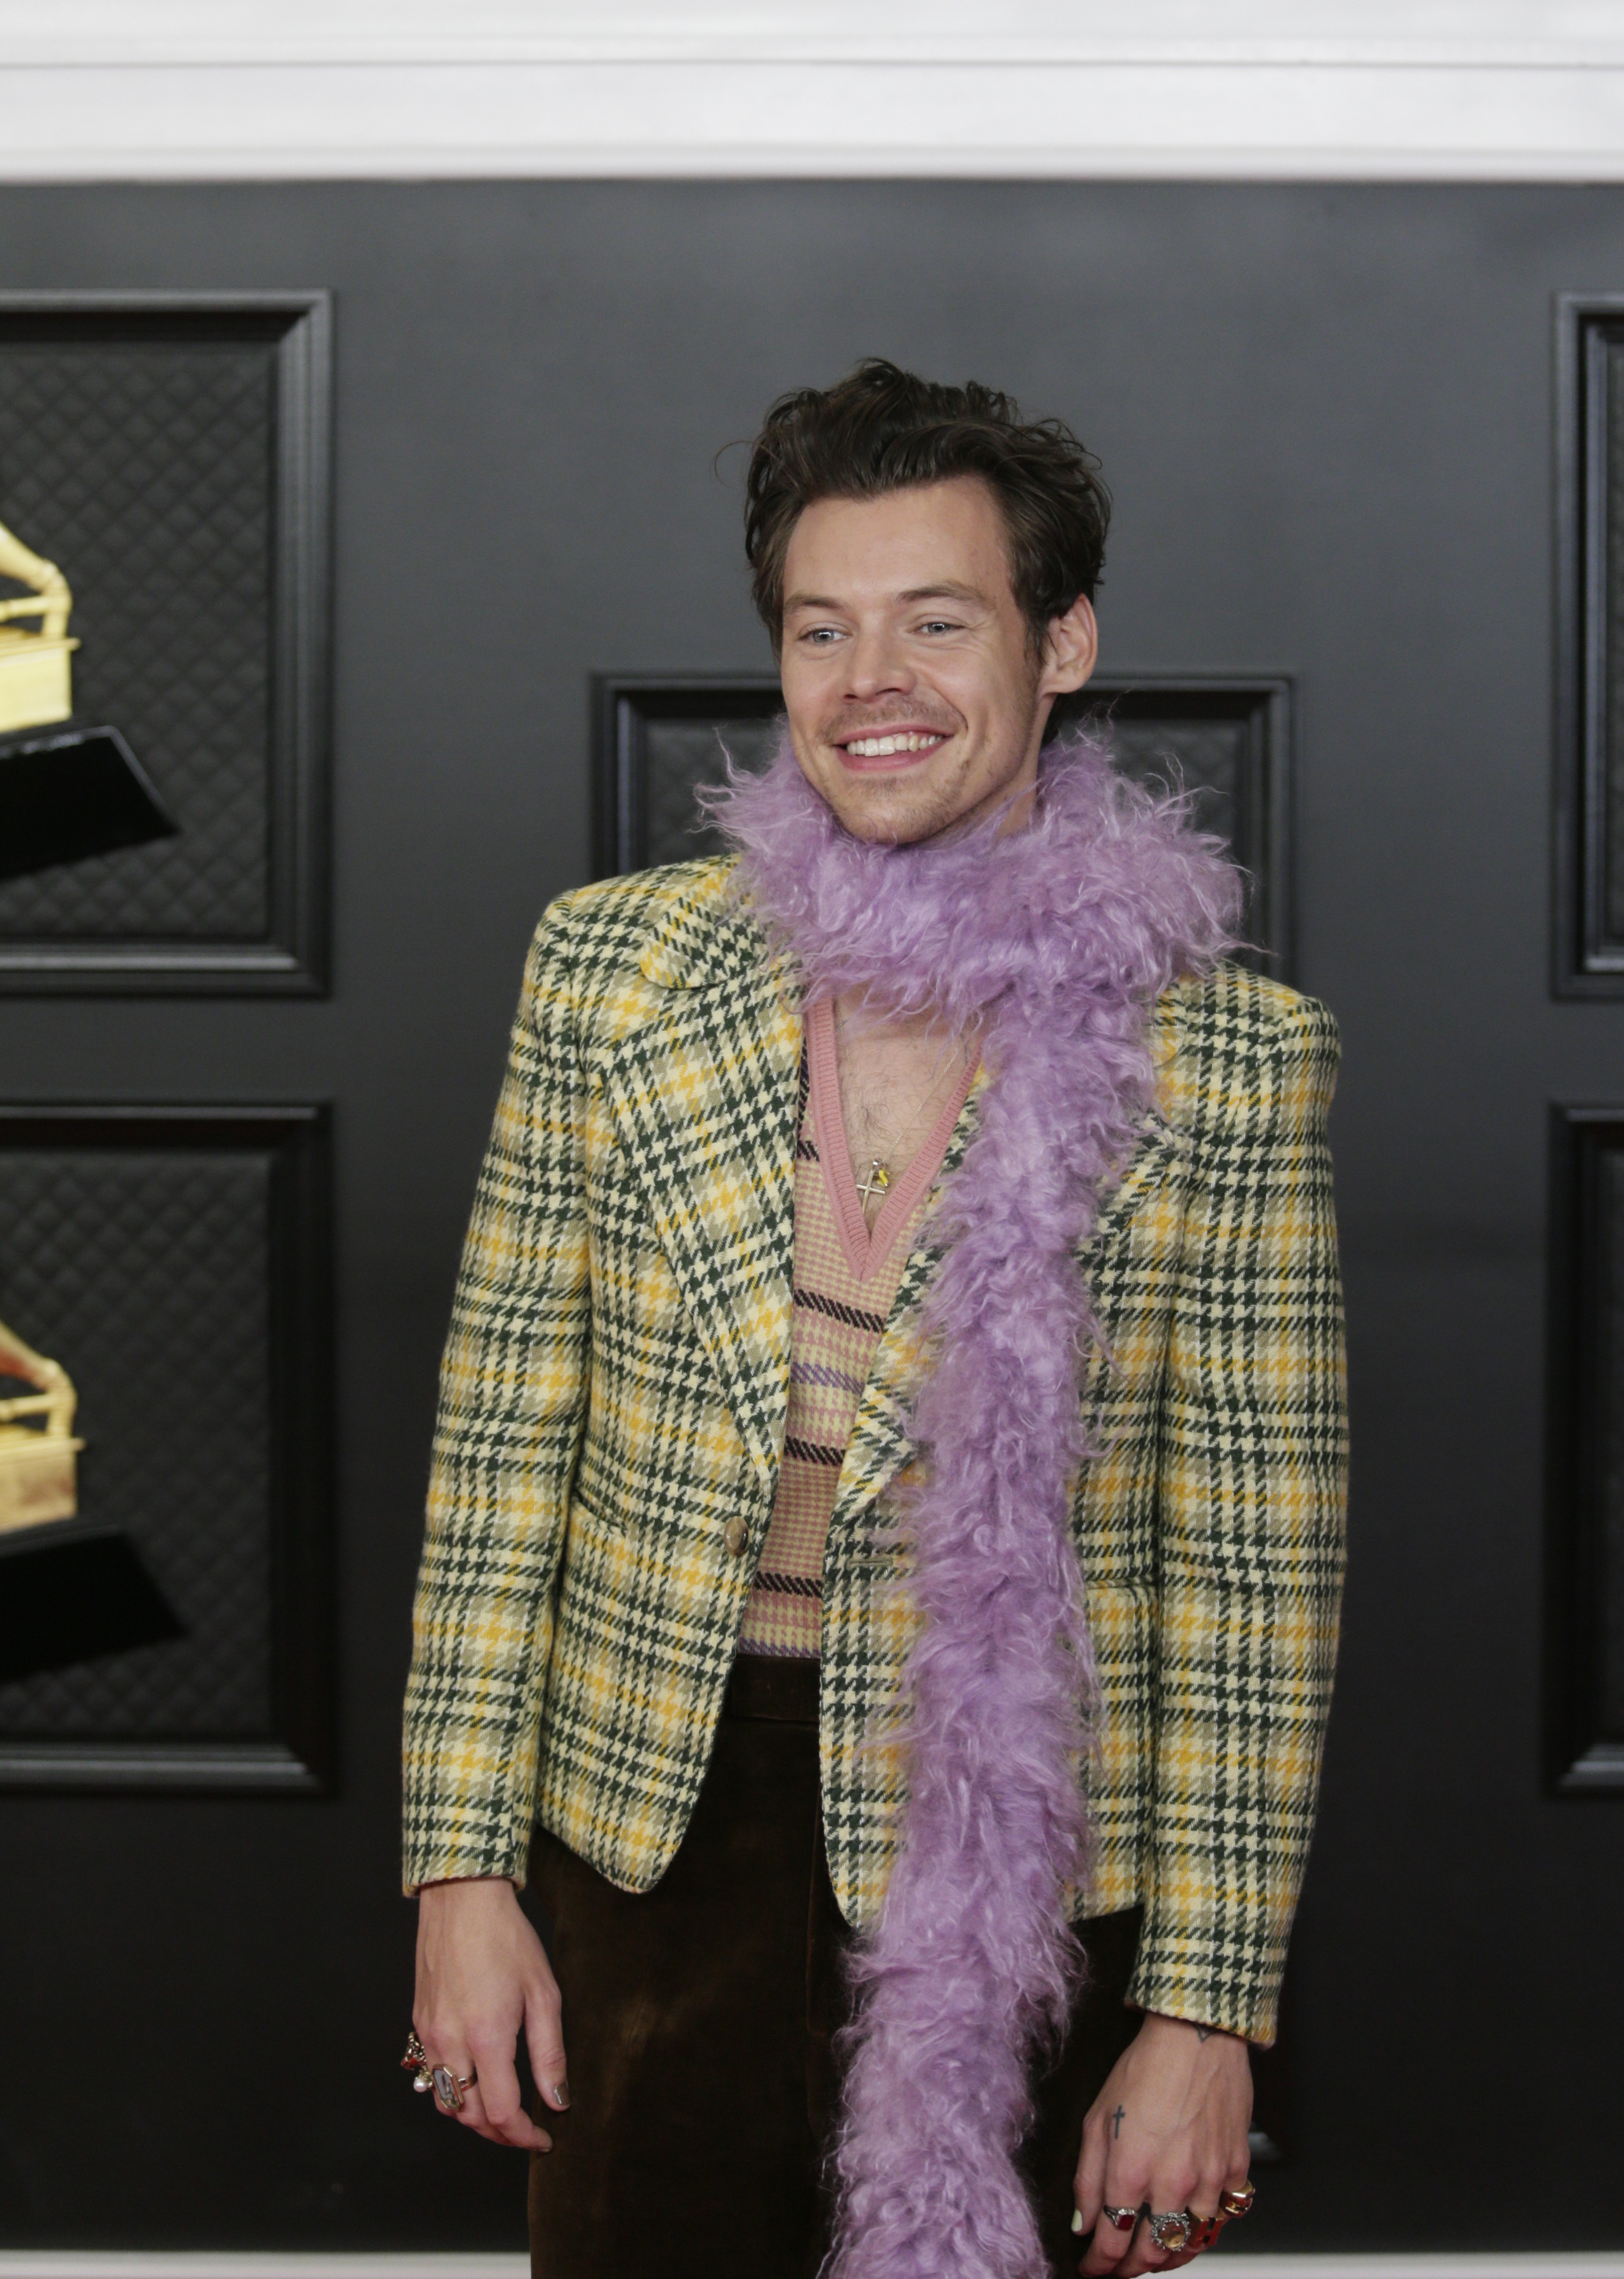 LOS ANGELES - MARCH 14: Harry Styles at THE 63rd ANNUAL GRAMMY® AWARDS, broadcast live from the STAPLES Center in Los Angeles, Sunday, March 14, 2021 (8:00-11:30 PM, live ET/5:00-8:30 PM, live PT) on the CBS Television Network and Paramount+. (Photo by Fr (Foto: CBS via Getty Images)